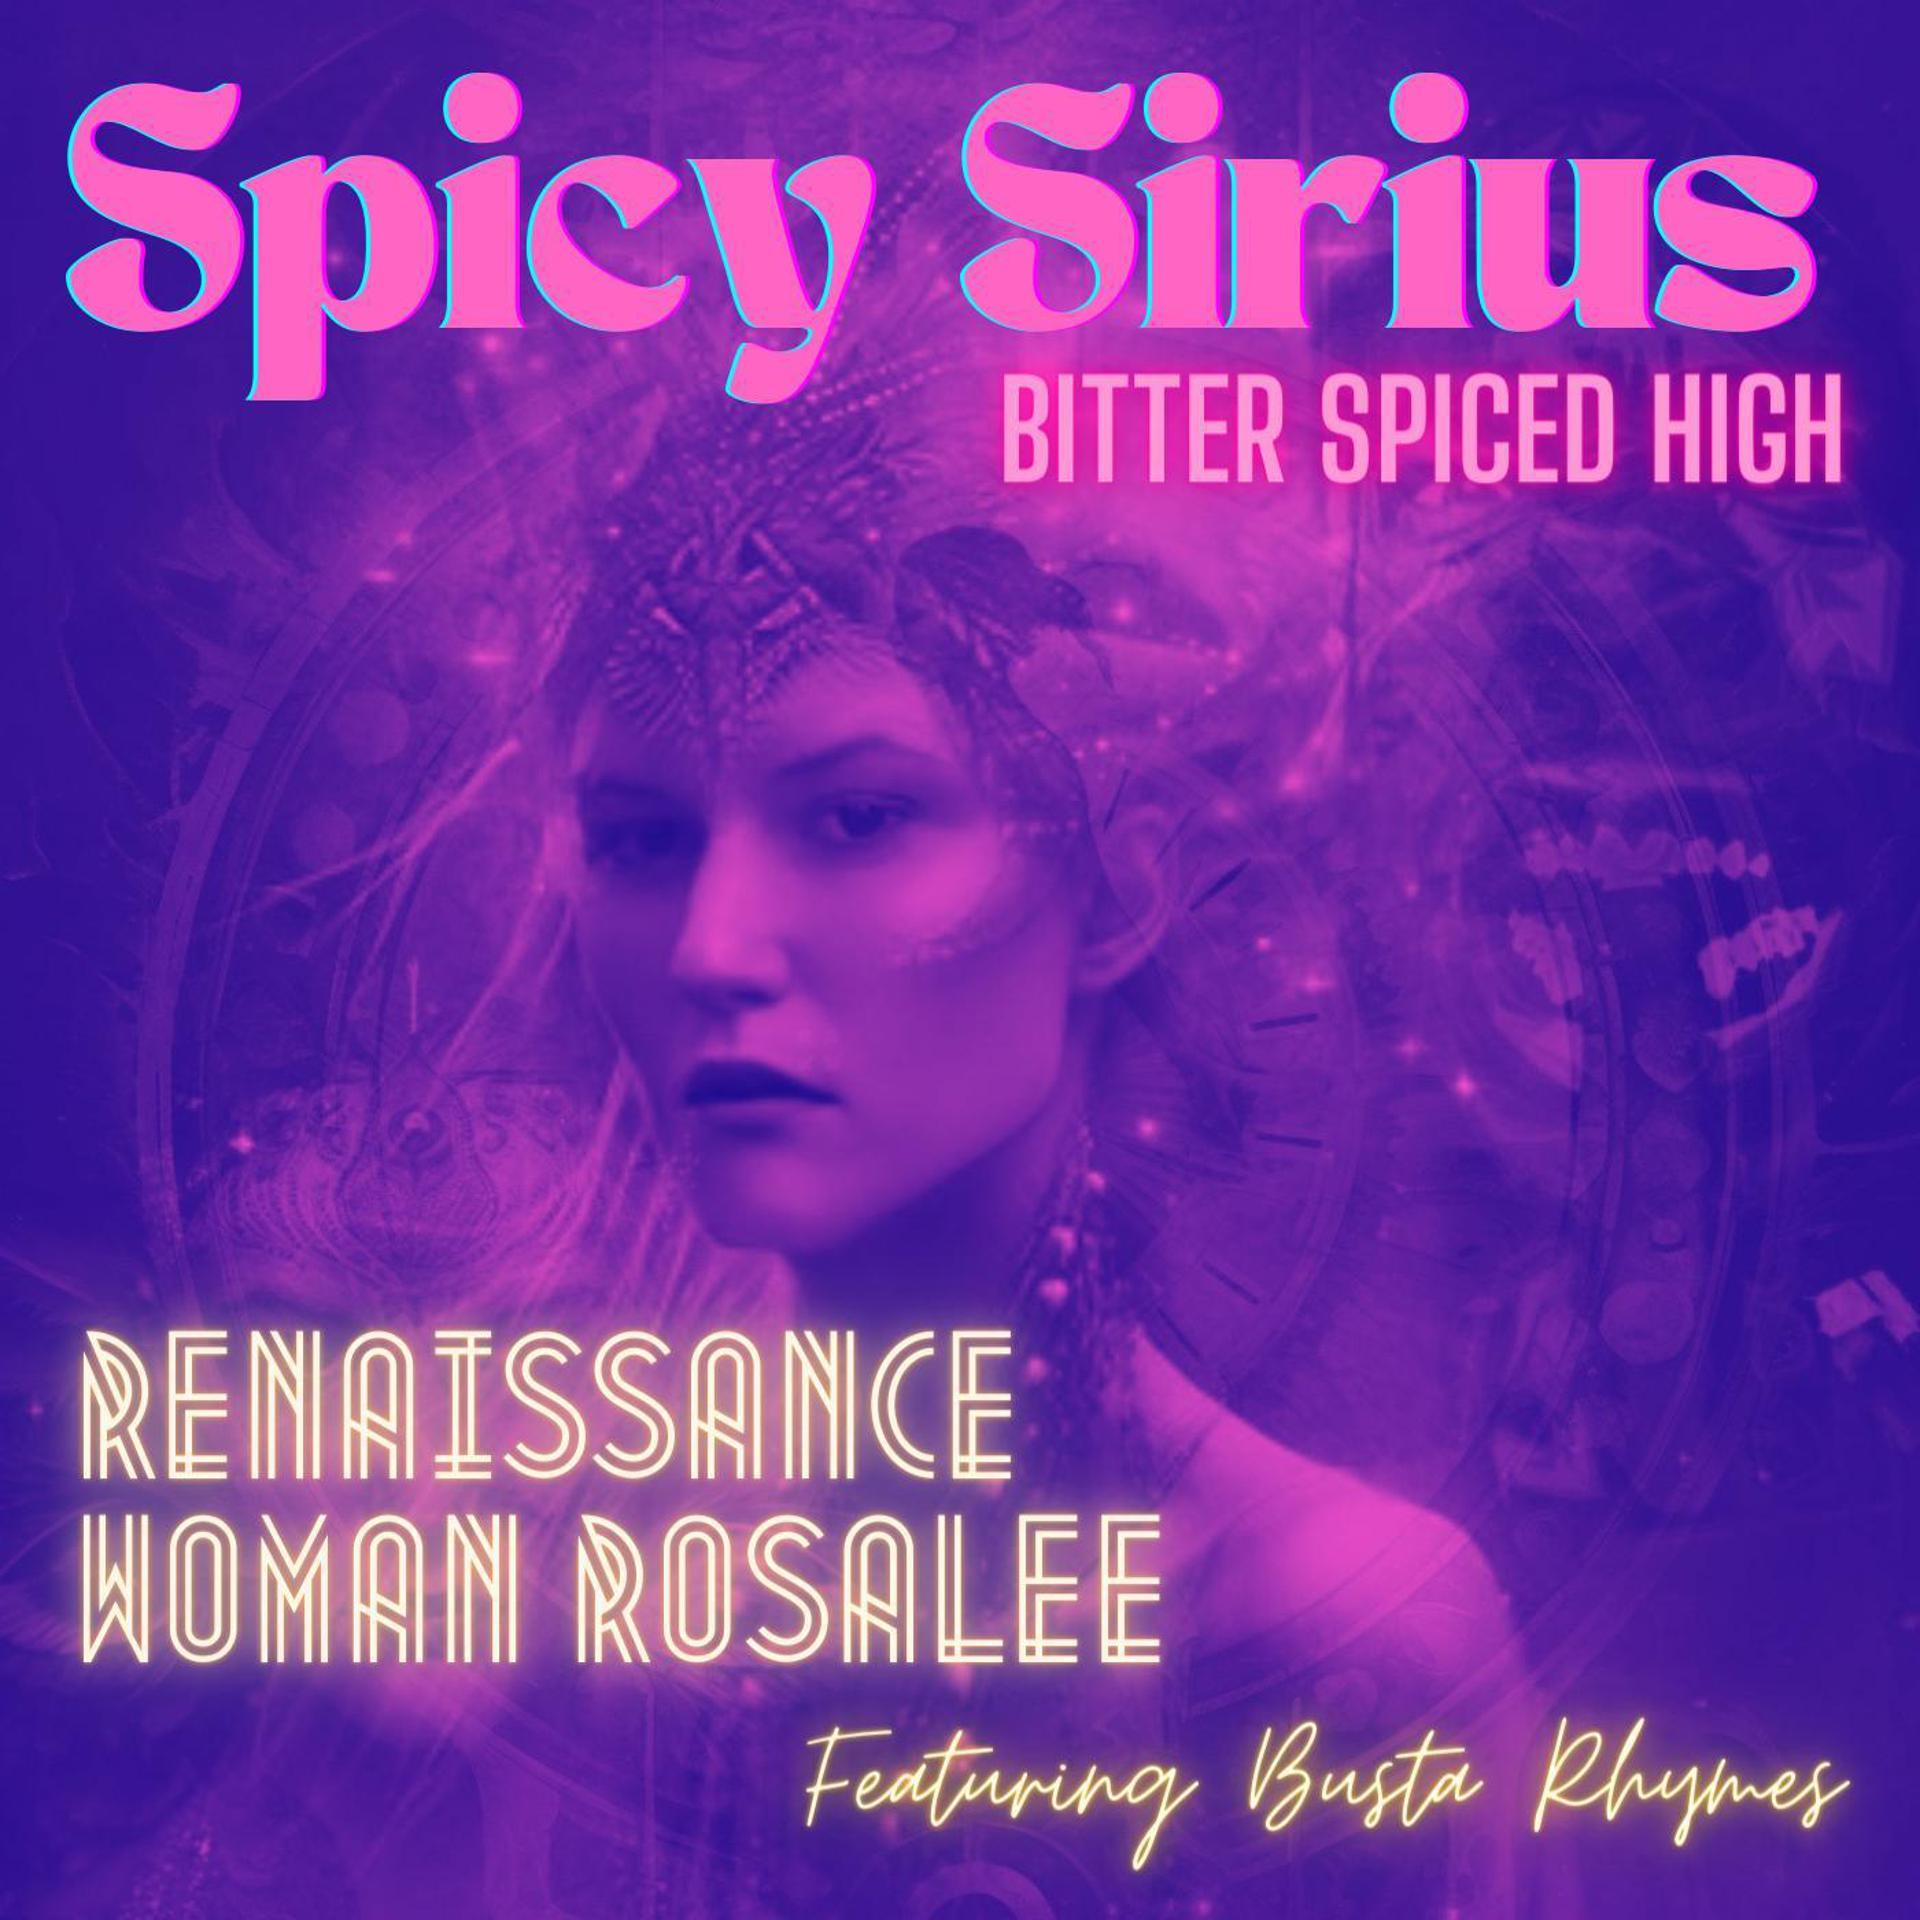 Постер альбома Spicy Sirius Bitter Spiced High (feat. Busta Rhymes)